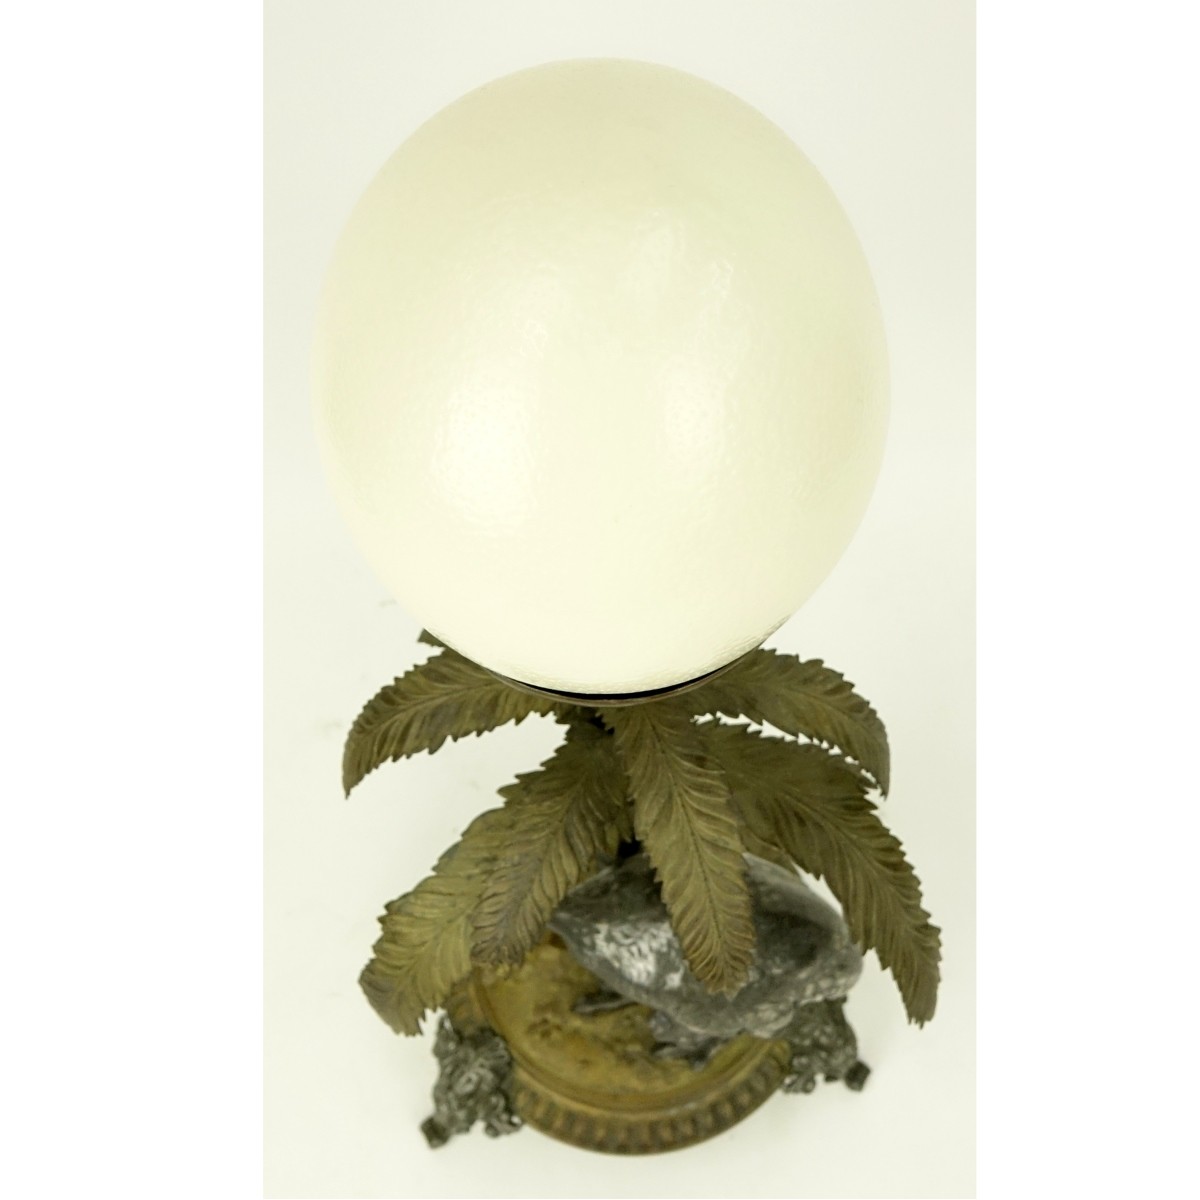 Silverplate and Brass Centerpiece with Ostrich Egg